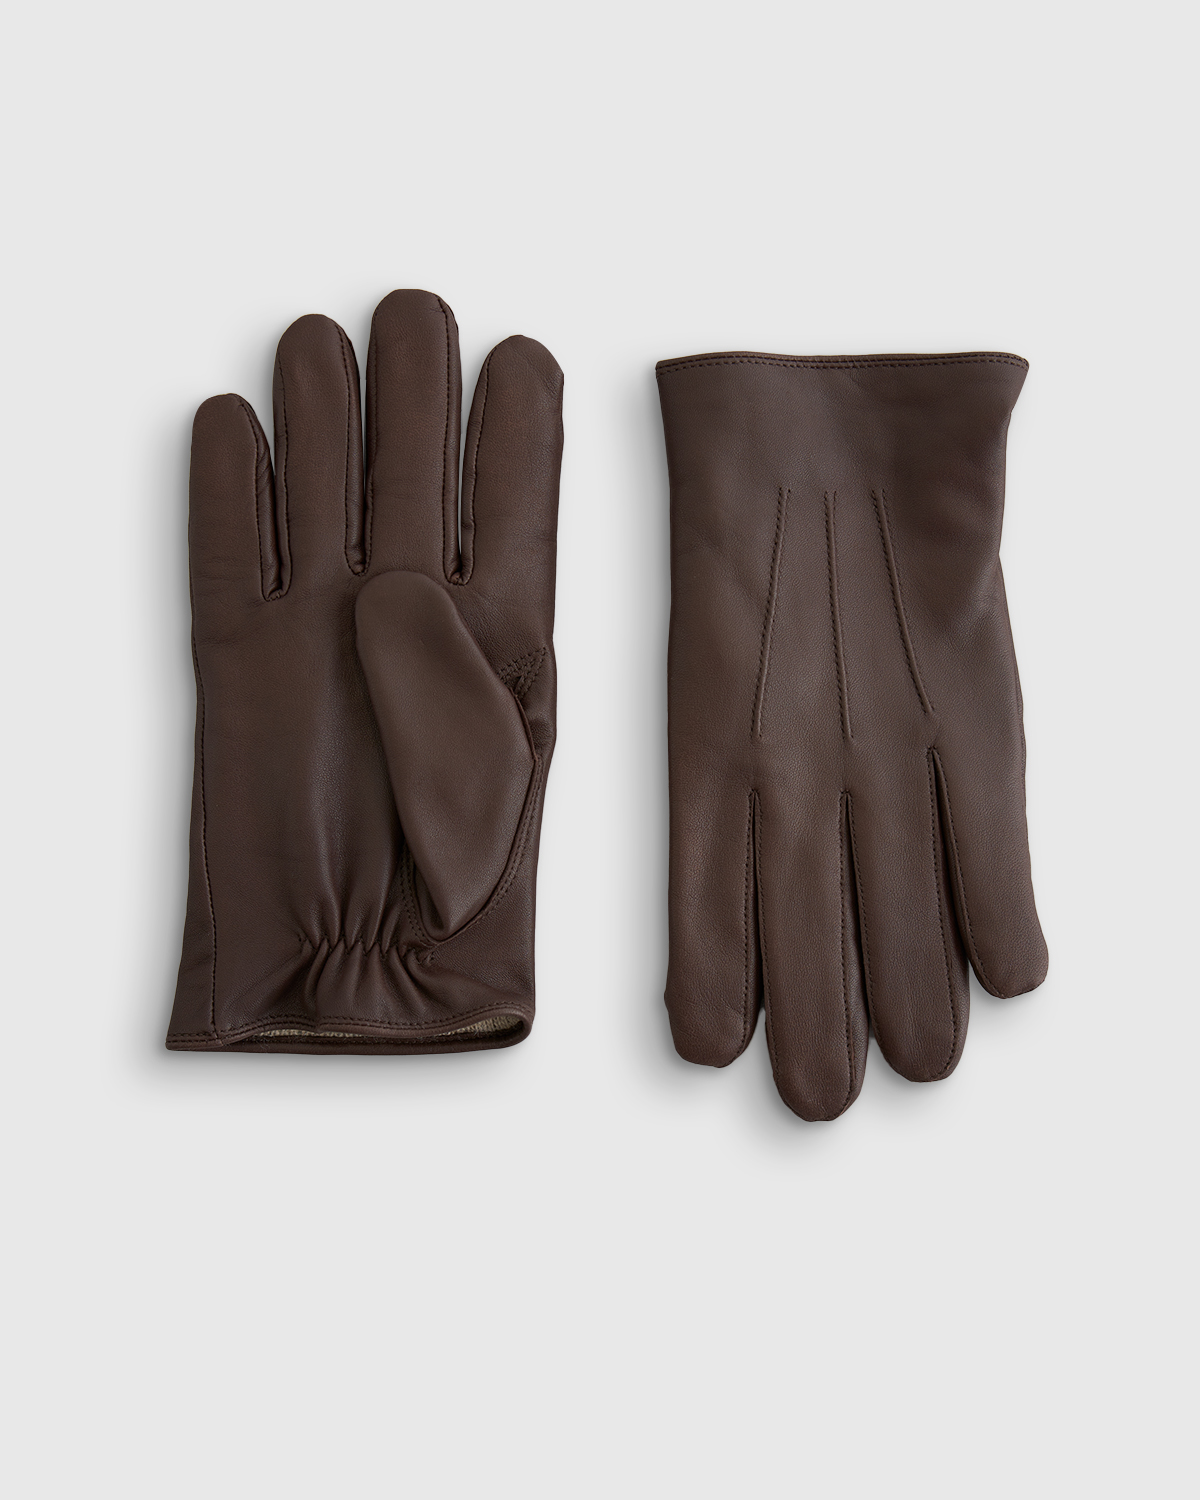 Men's Cashmere Lined Leather Gloves